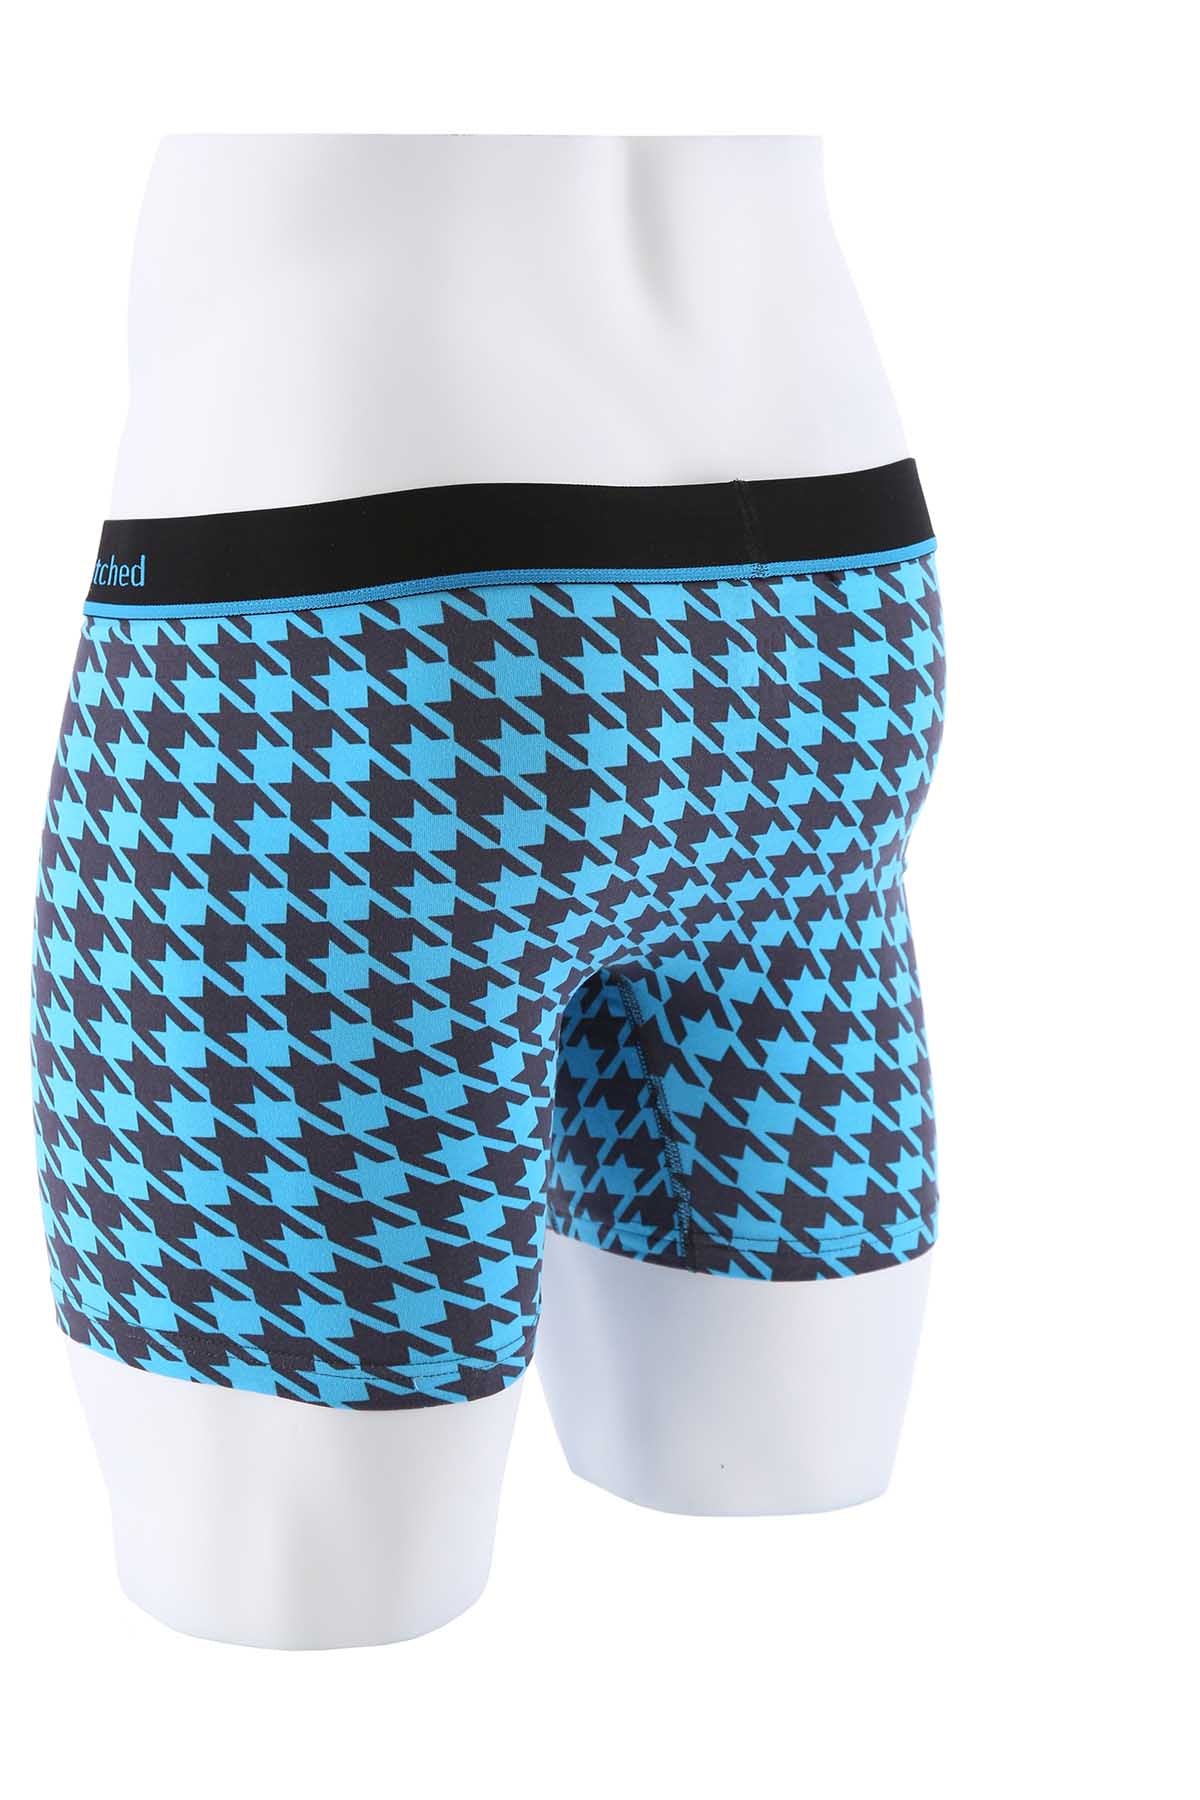 Unsimply Stitched Blue Houndstooth Boxer